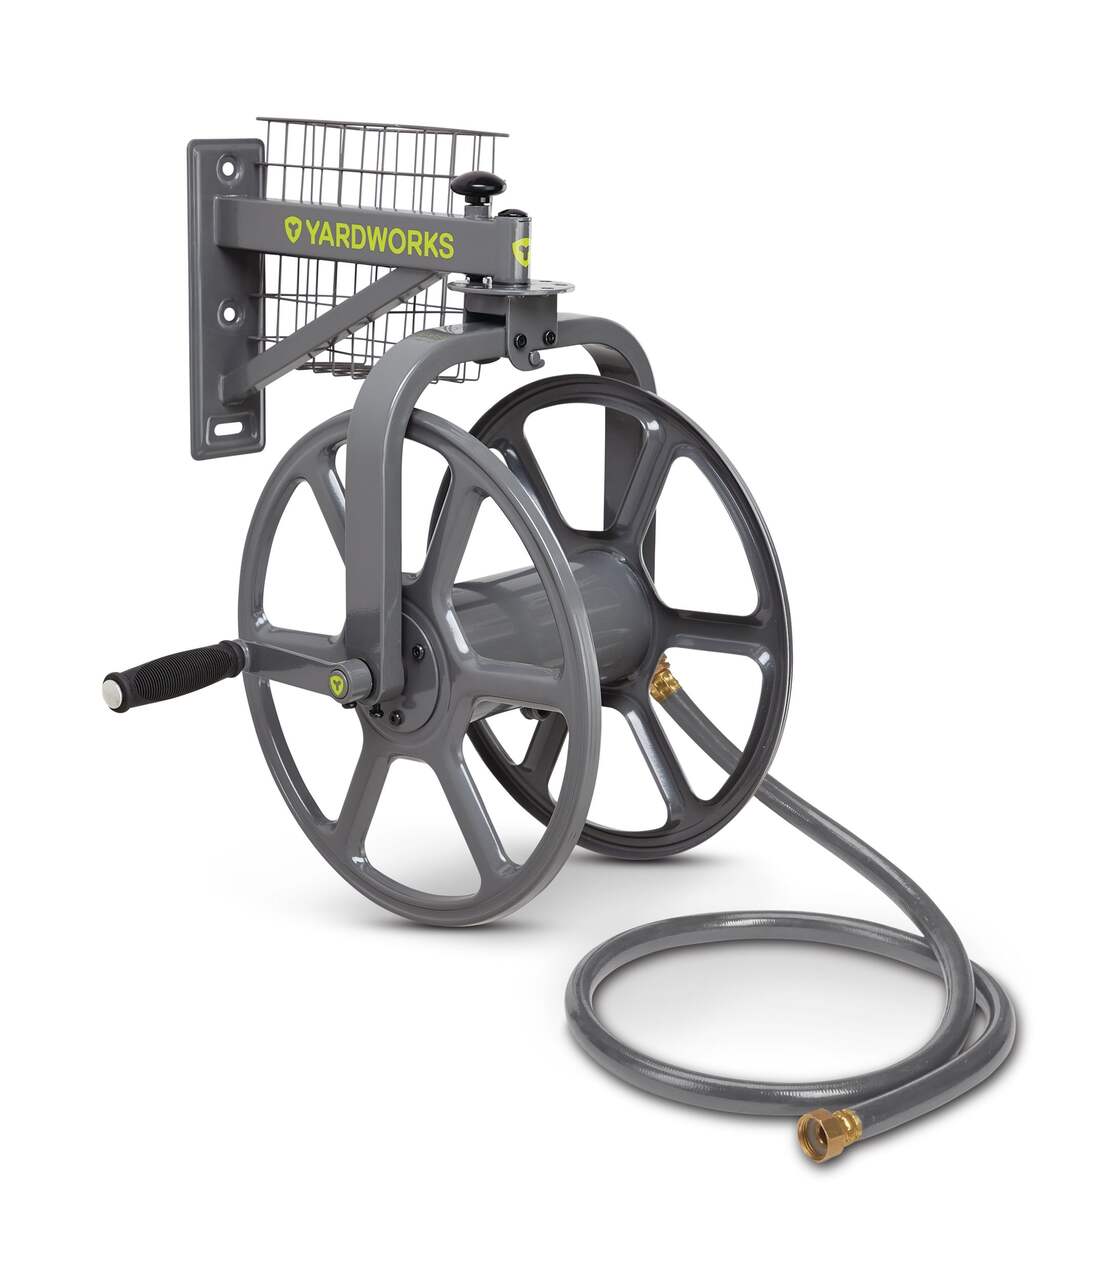  Hose Reel Replacement Parts